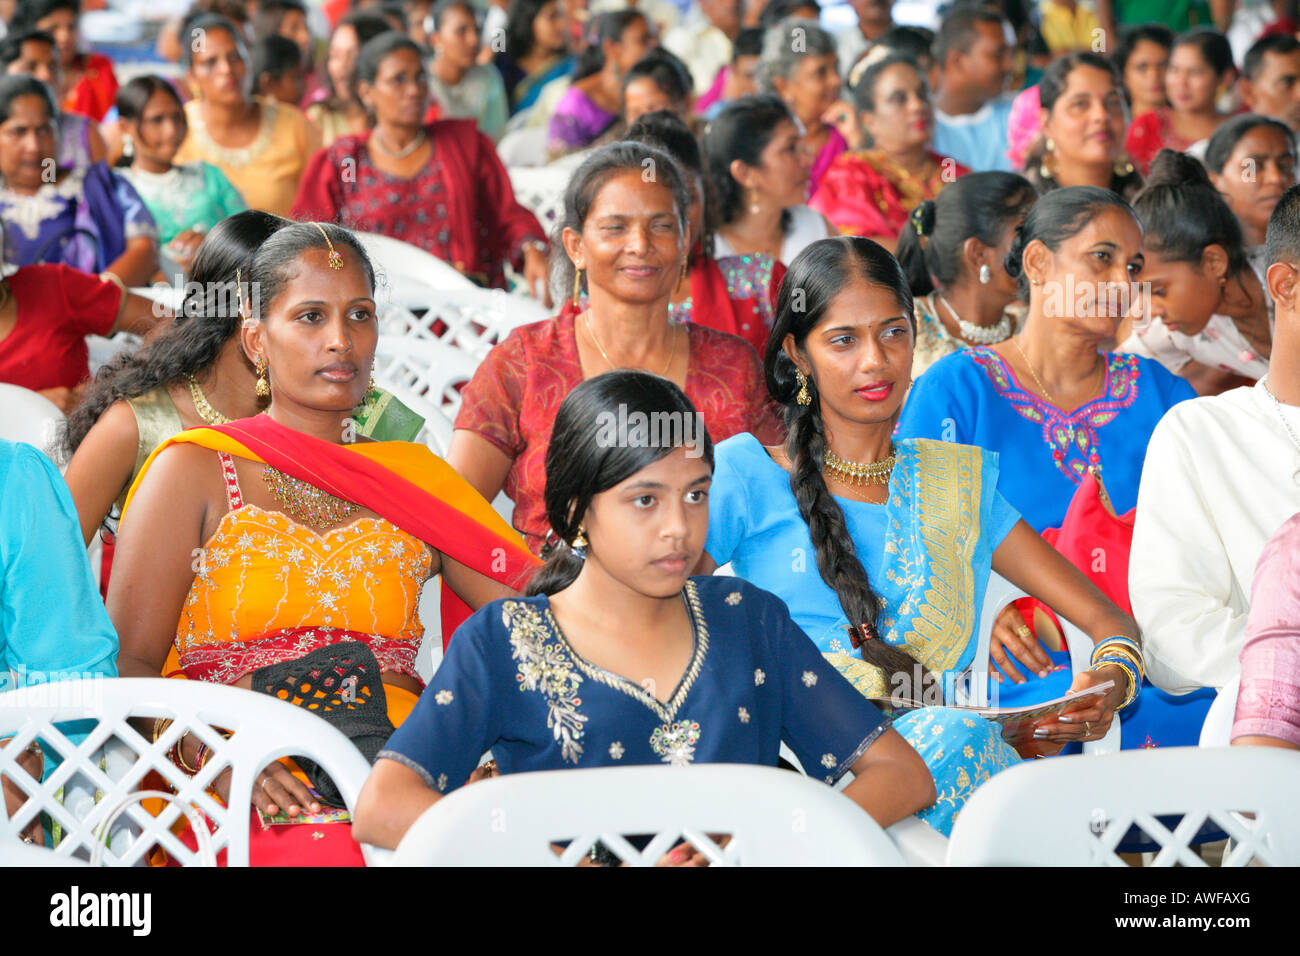 Women of Indian ethnicity at a Hindu Festival, Georgetown, Guyana, South America Stock Photo